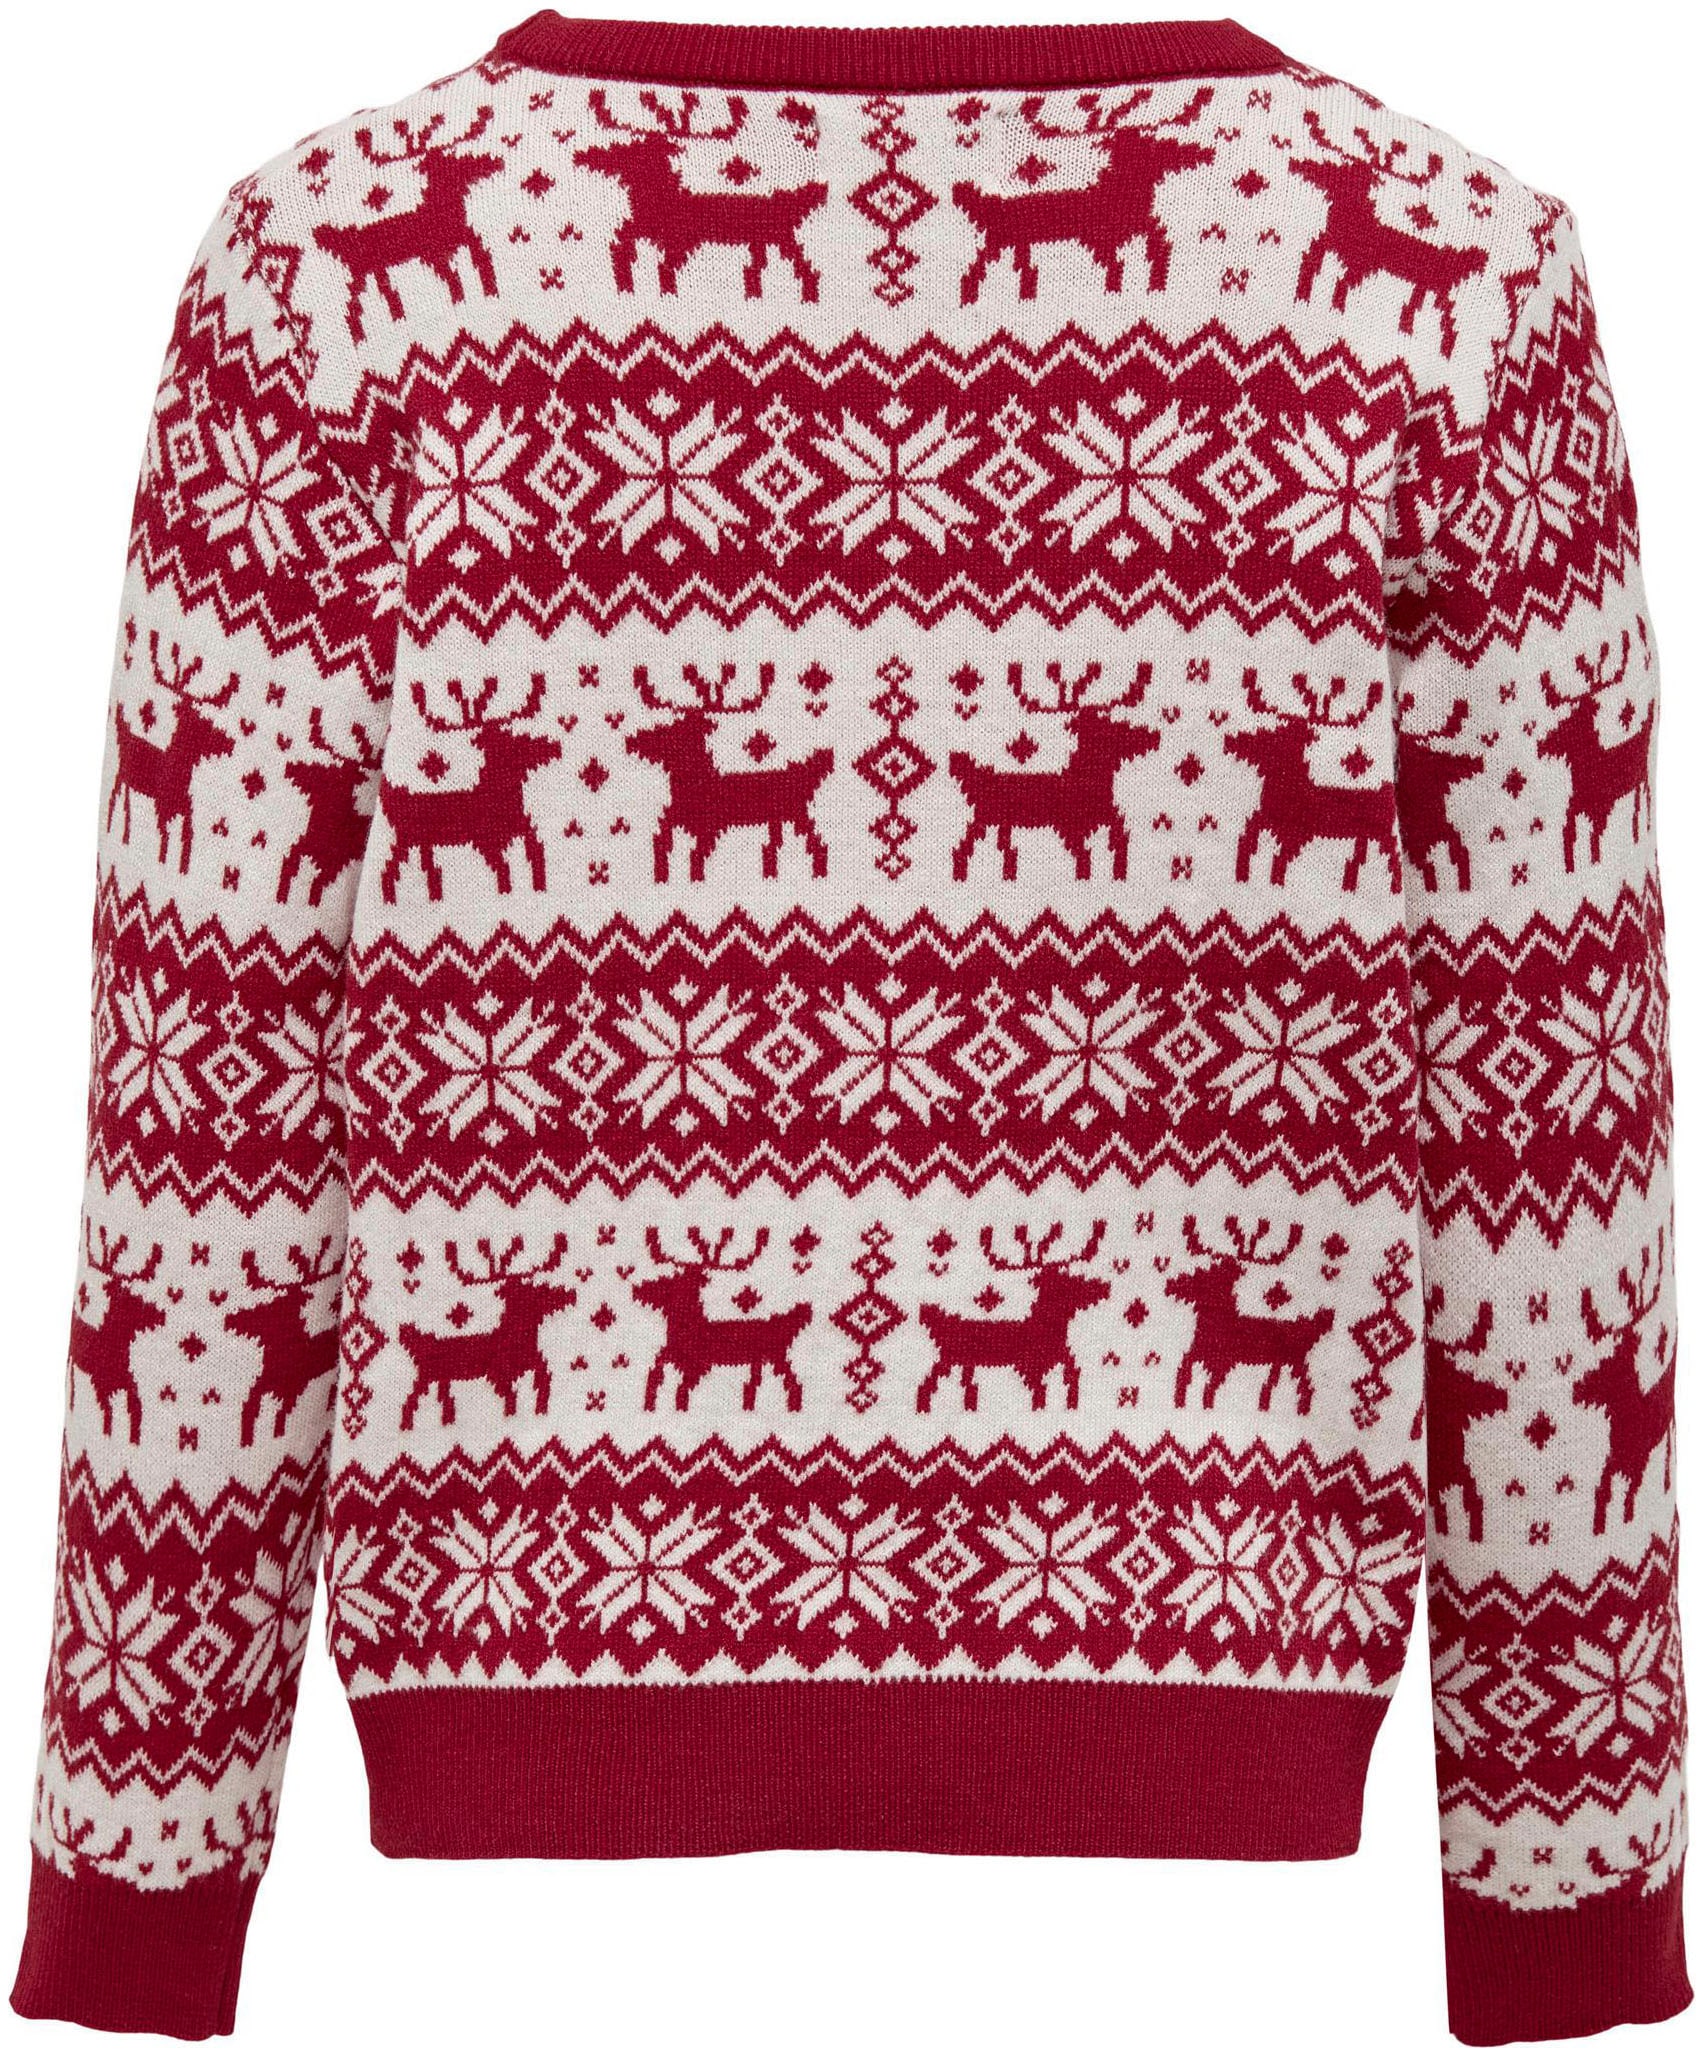 PULLOVER« online KIDS »KOGXMAS L/S SNOWFLAKE OTTO ONLY bei Strickpullover COMFY